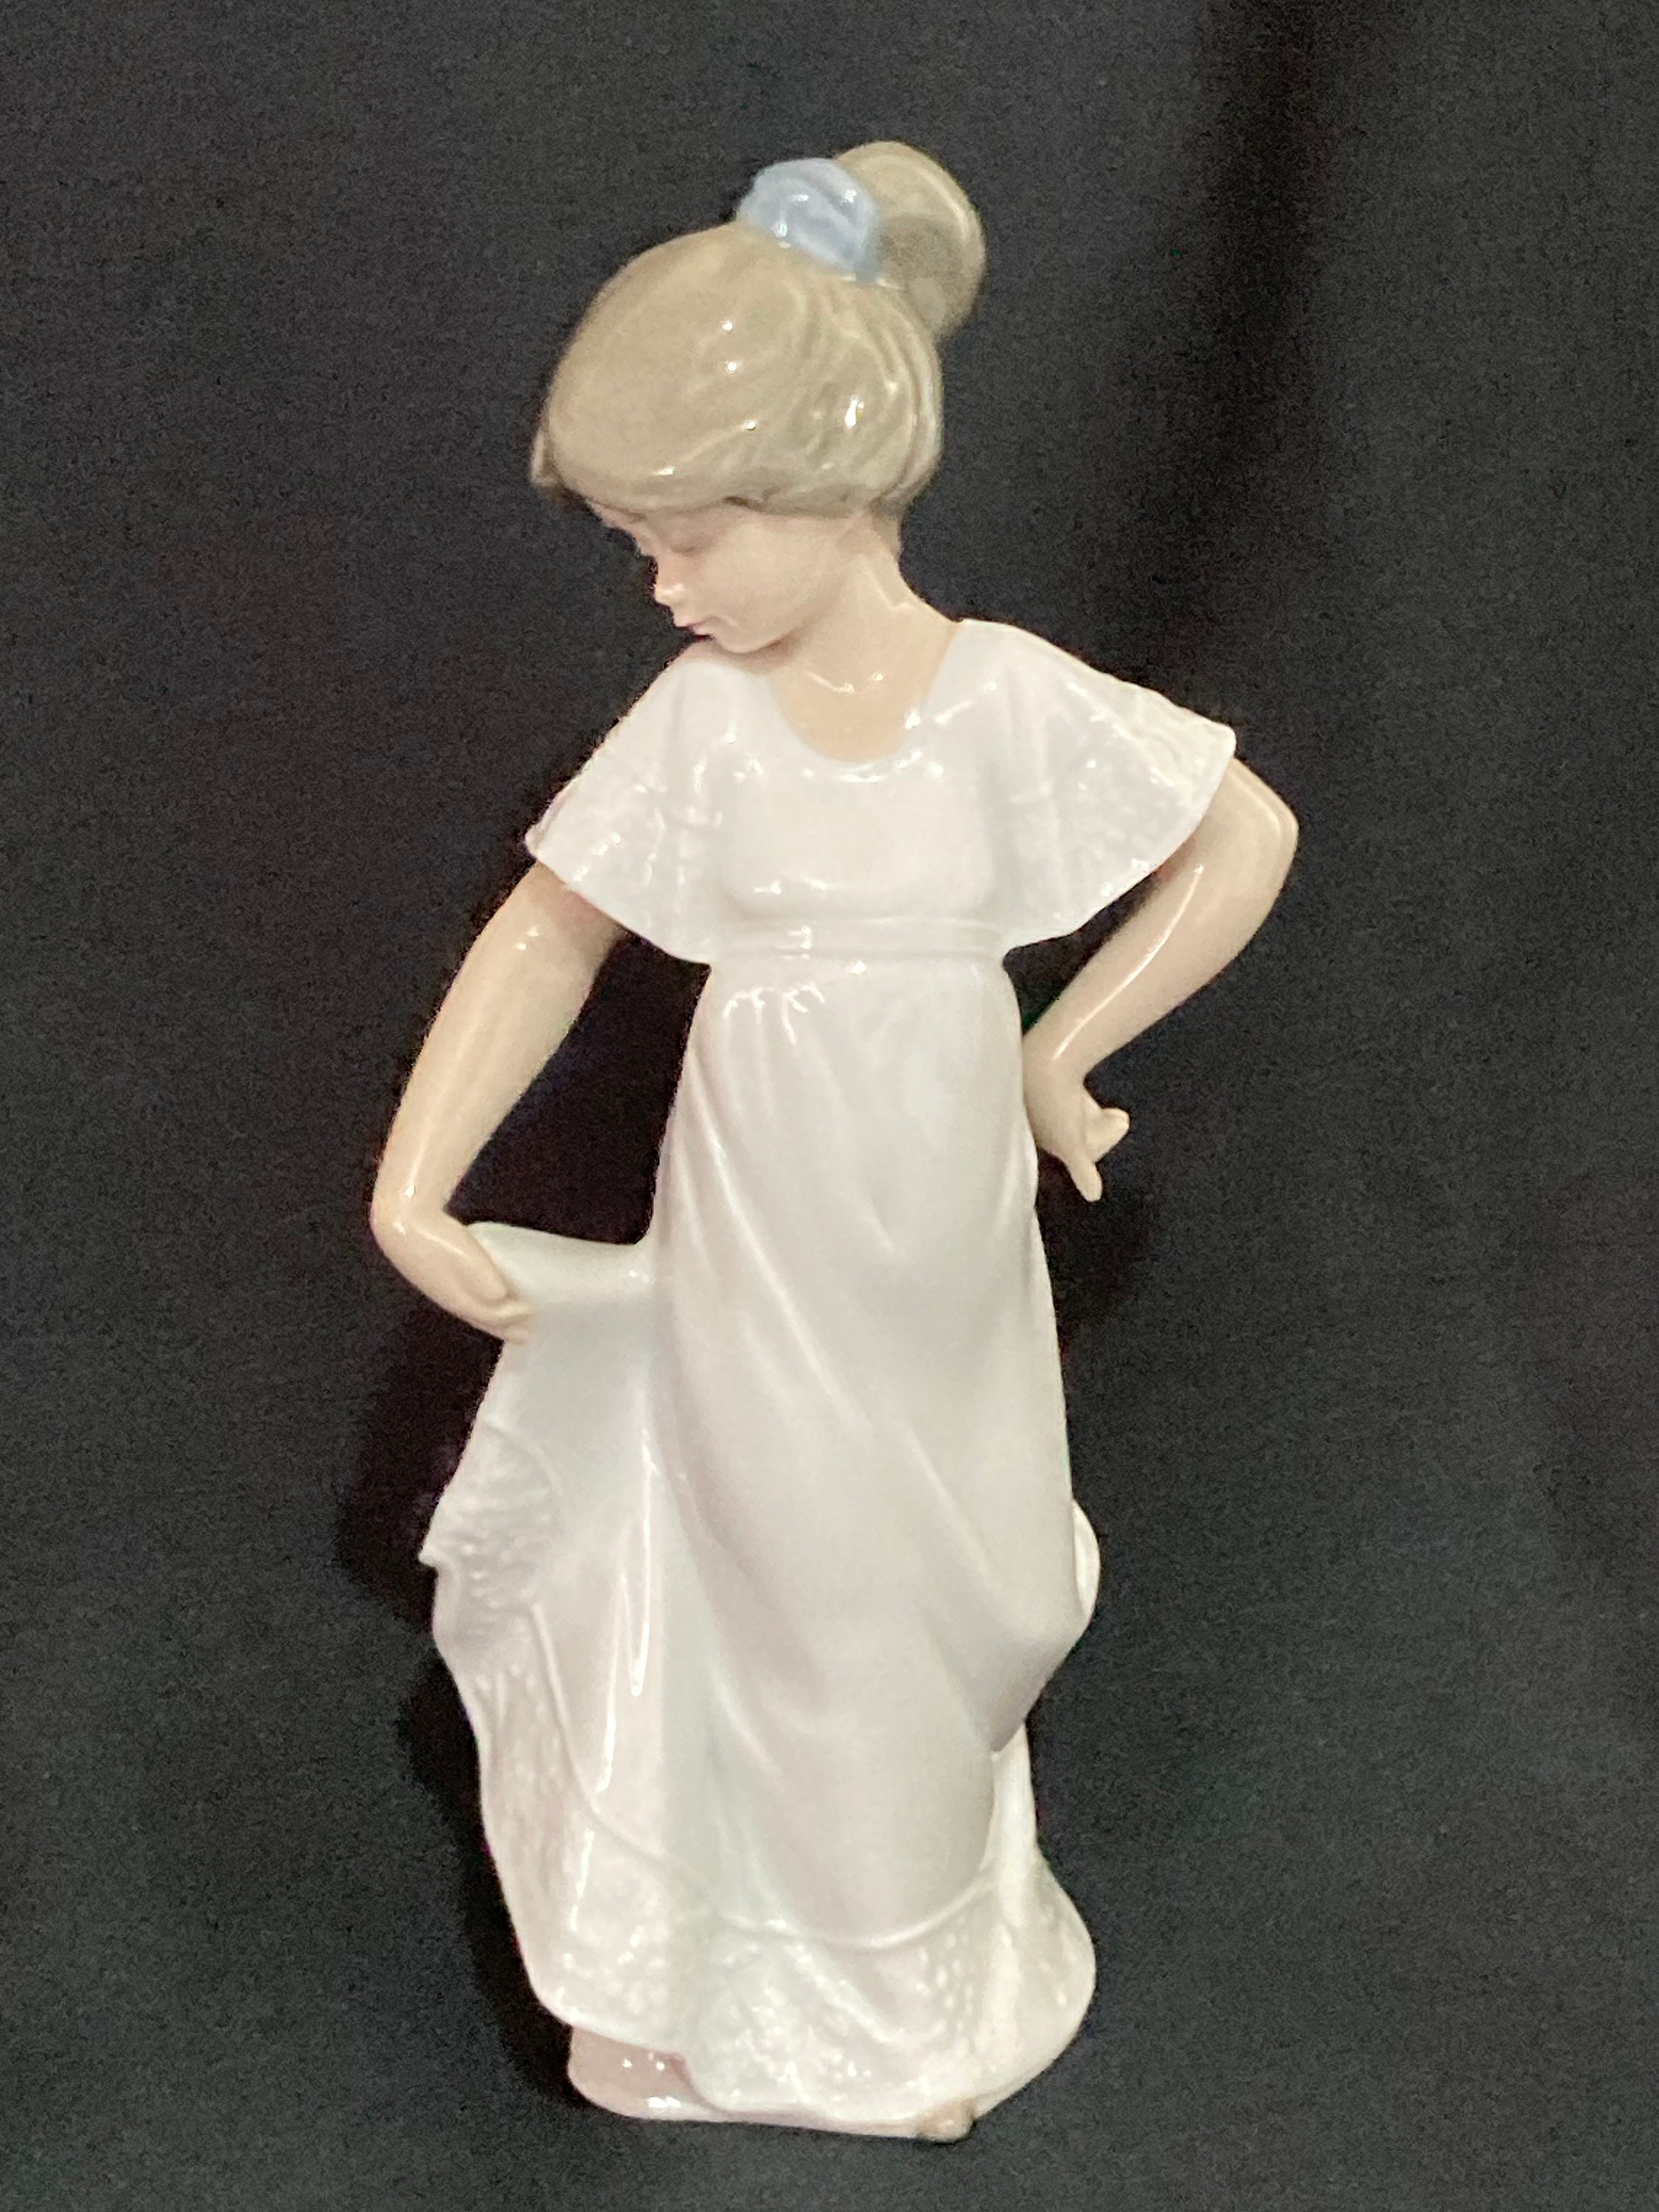 LLADRO NAO Porcelain Figurine of a Young Lady Posing in Her